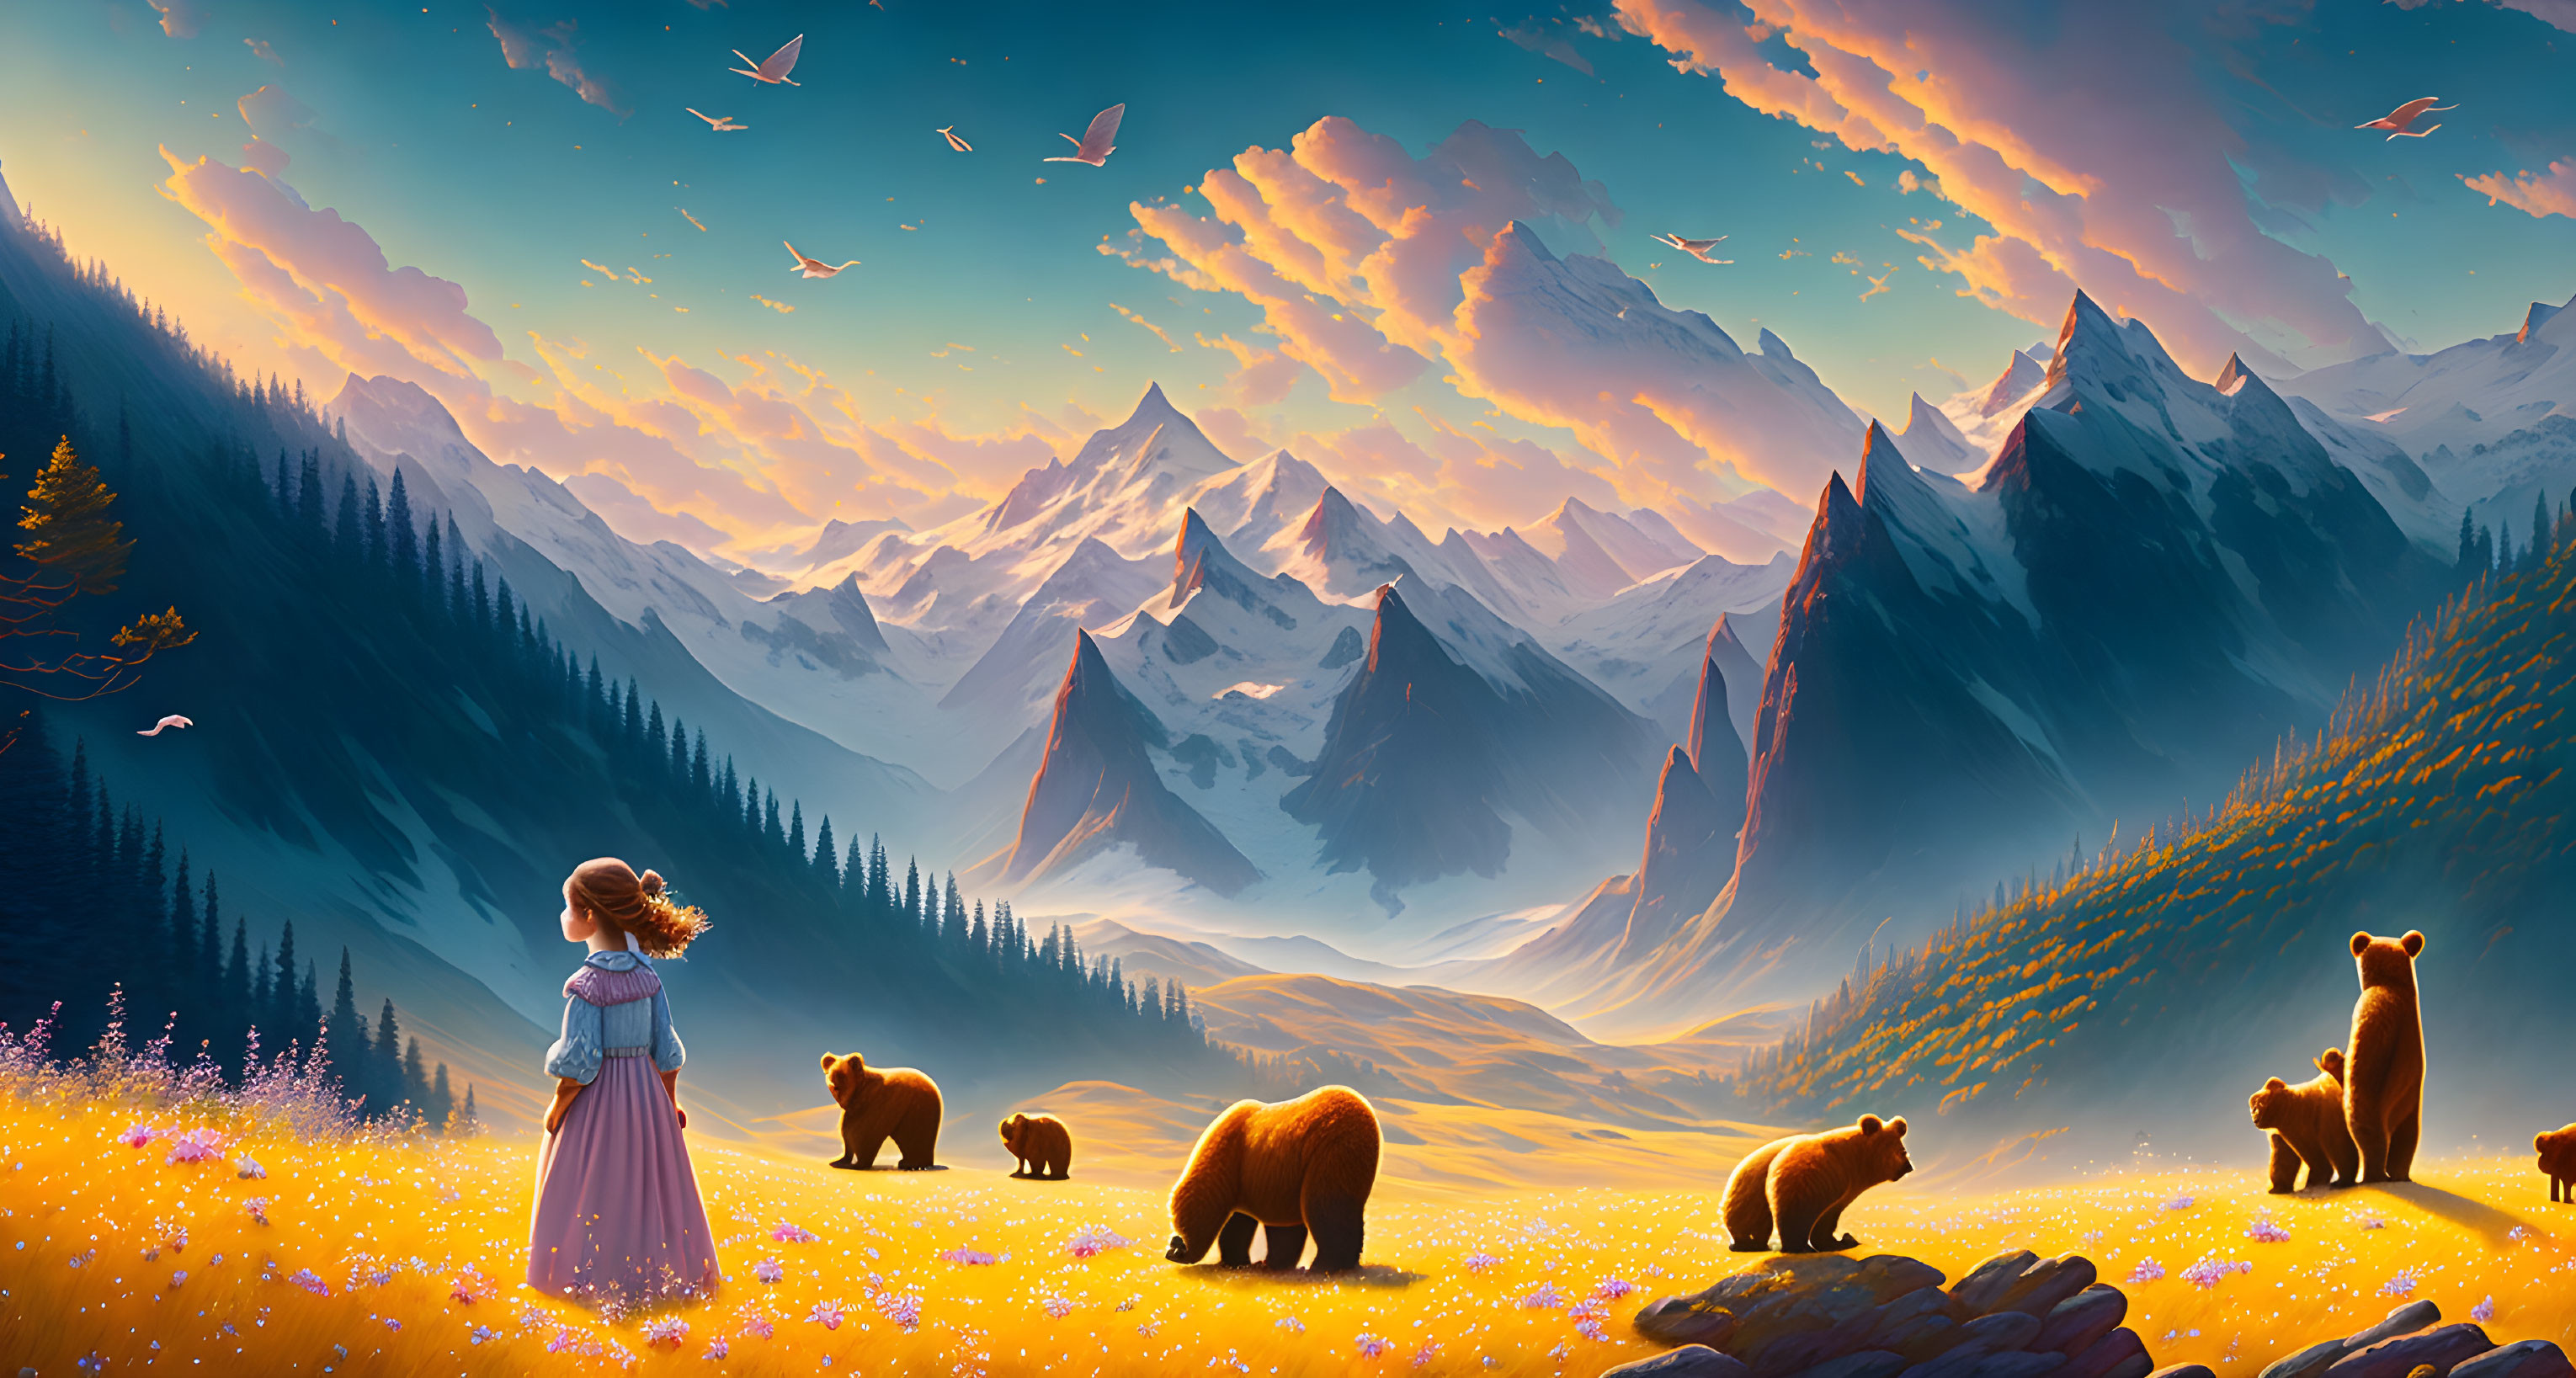 Woman in dress in vibrant meadow with bears and birds, mountains under dawn sky